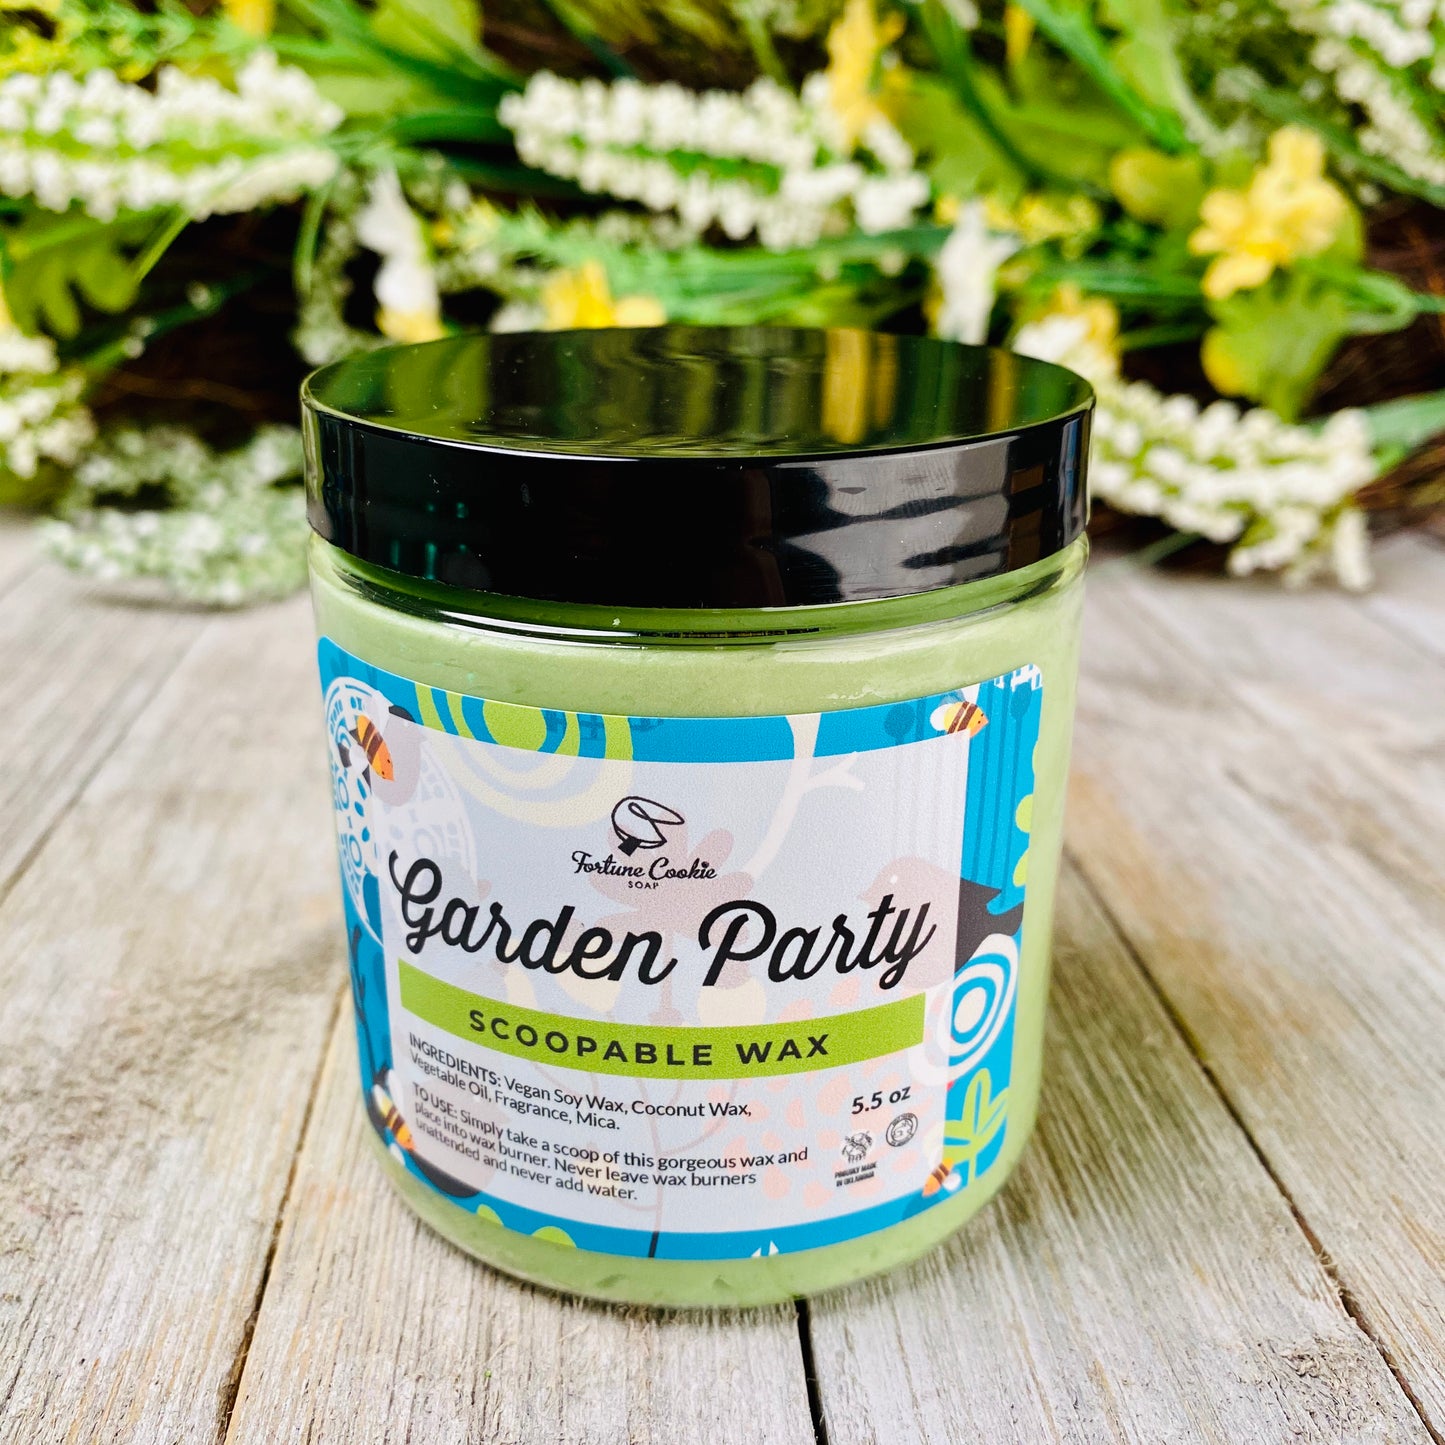 GARDEN PARTY Scoopable Wax